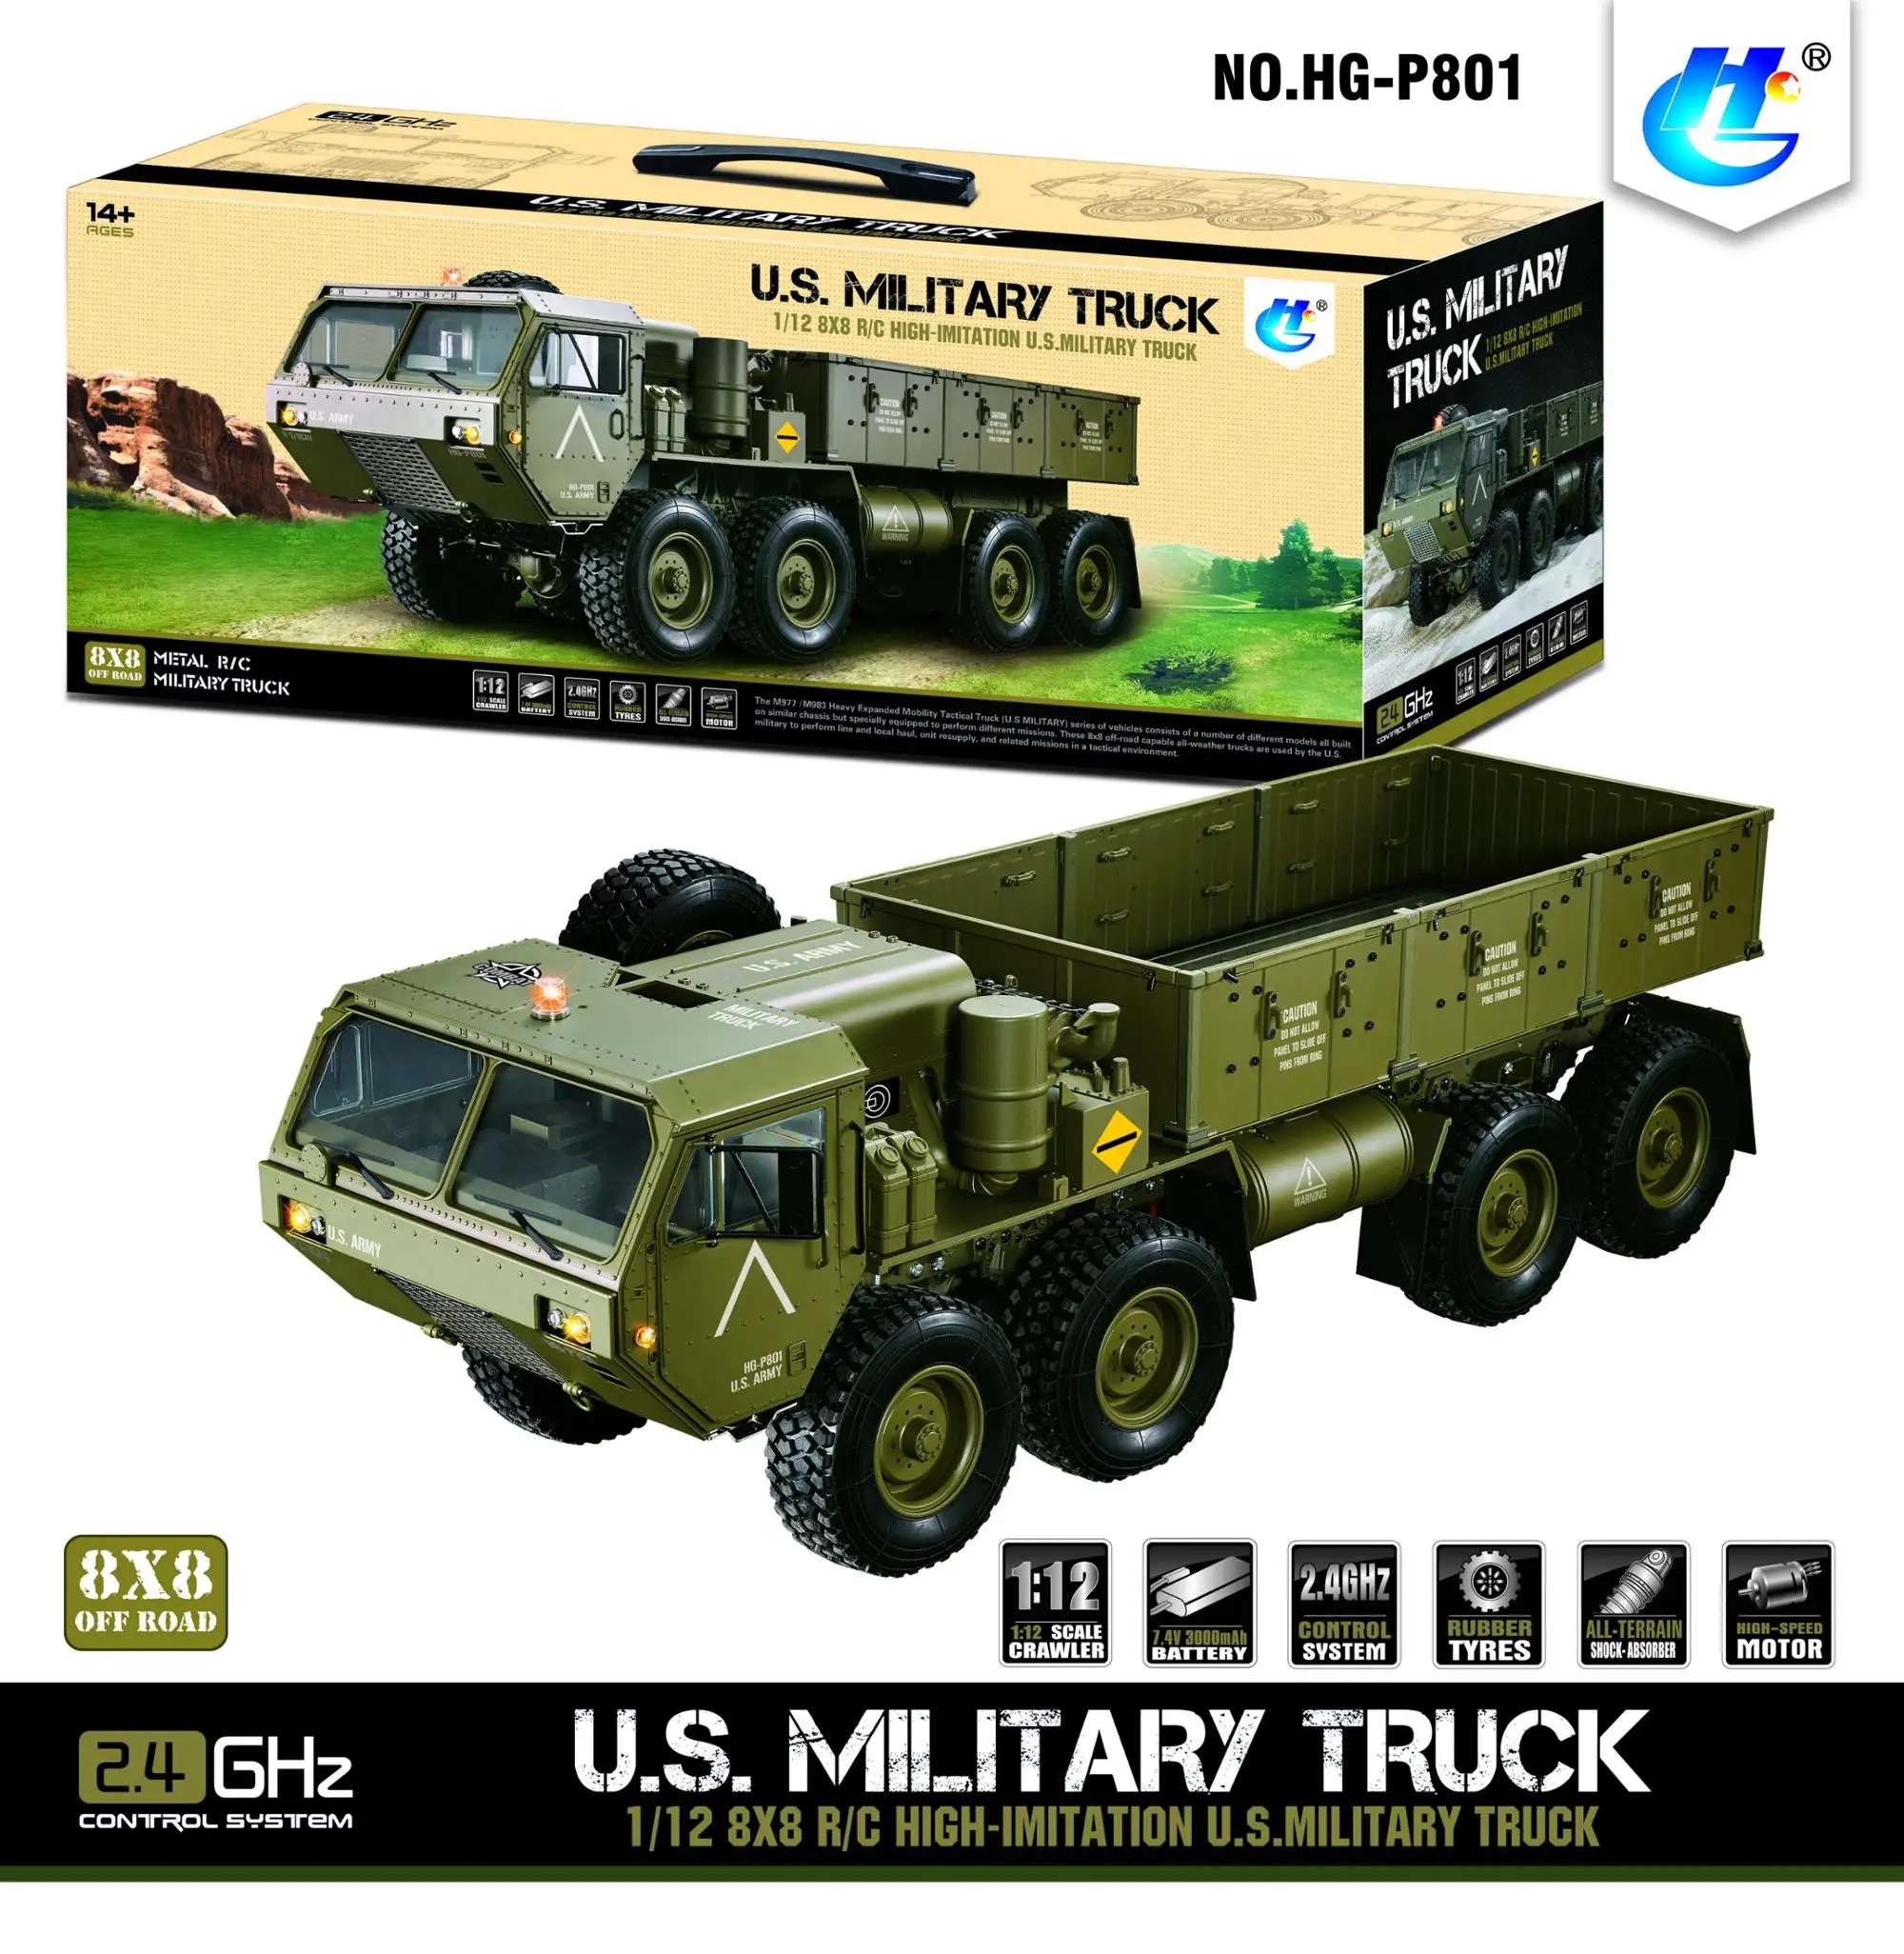 rc army trucks for sale